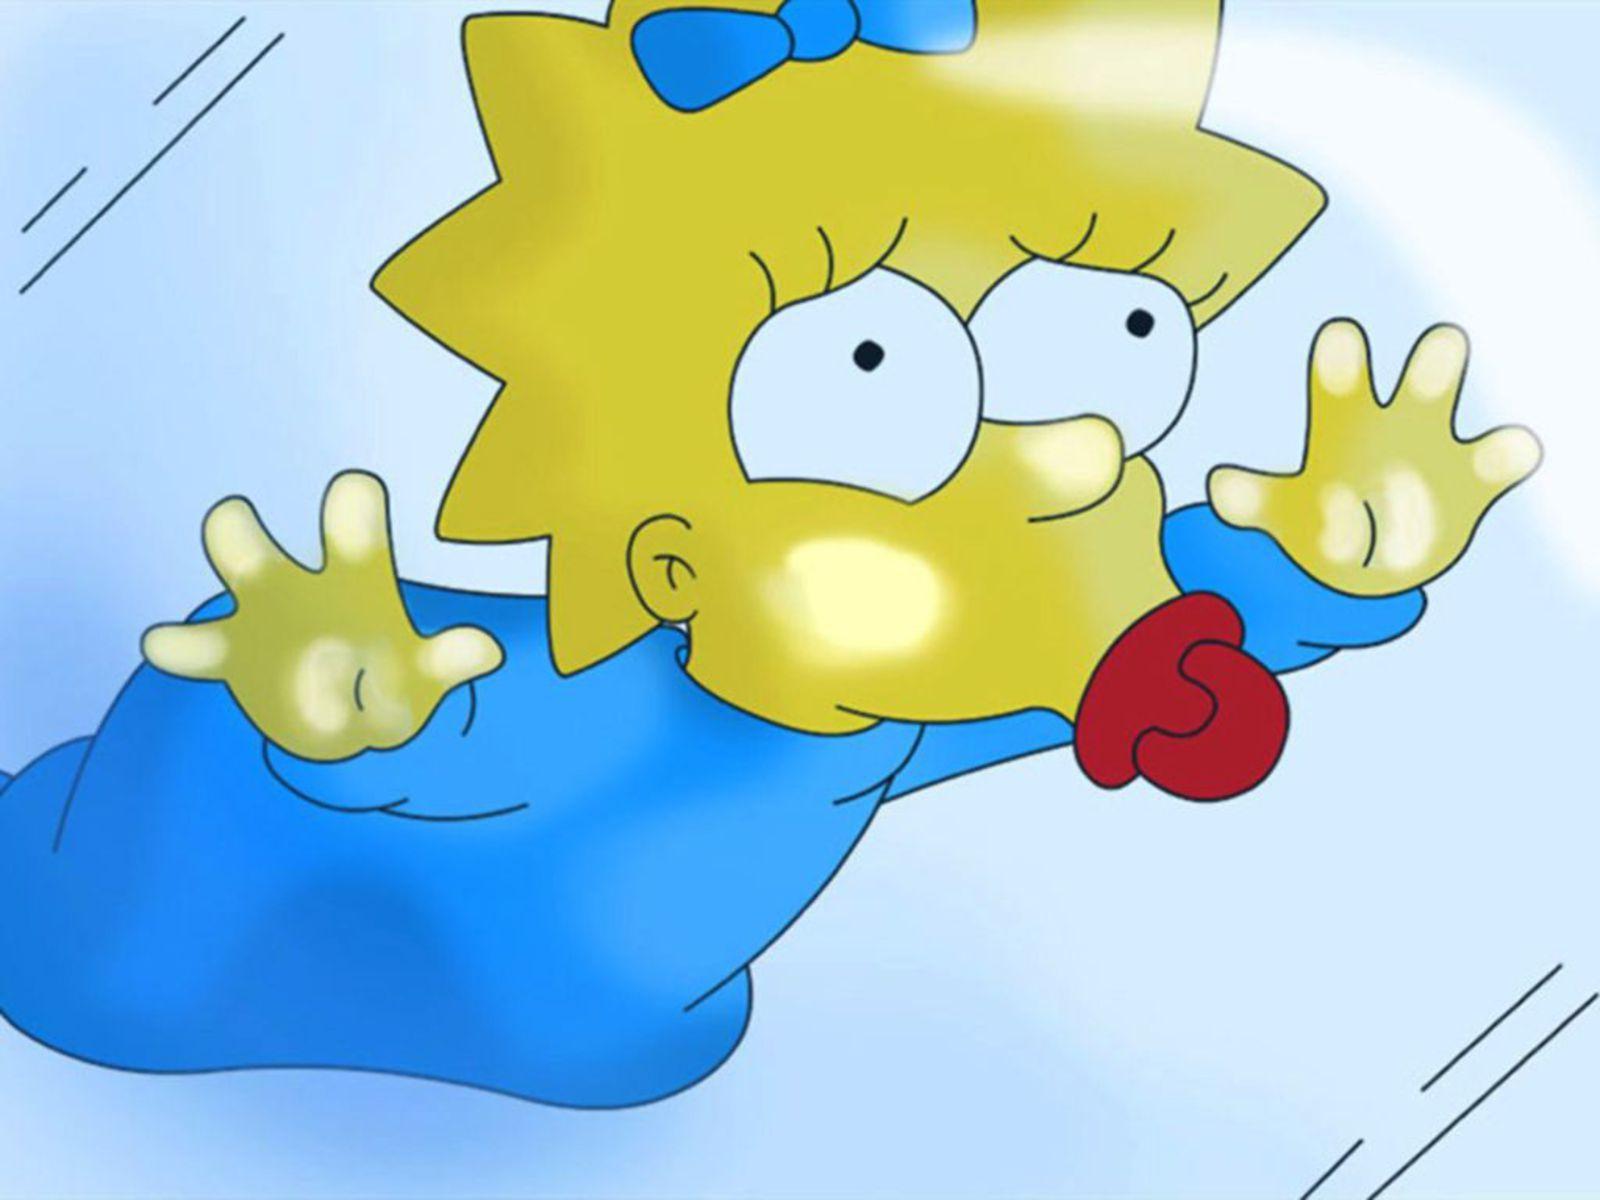 The Simpsons HQ Margaret Maggie Simpson. The Mary Sue